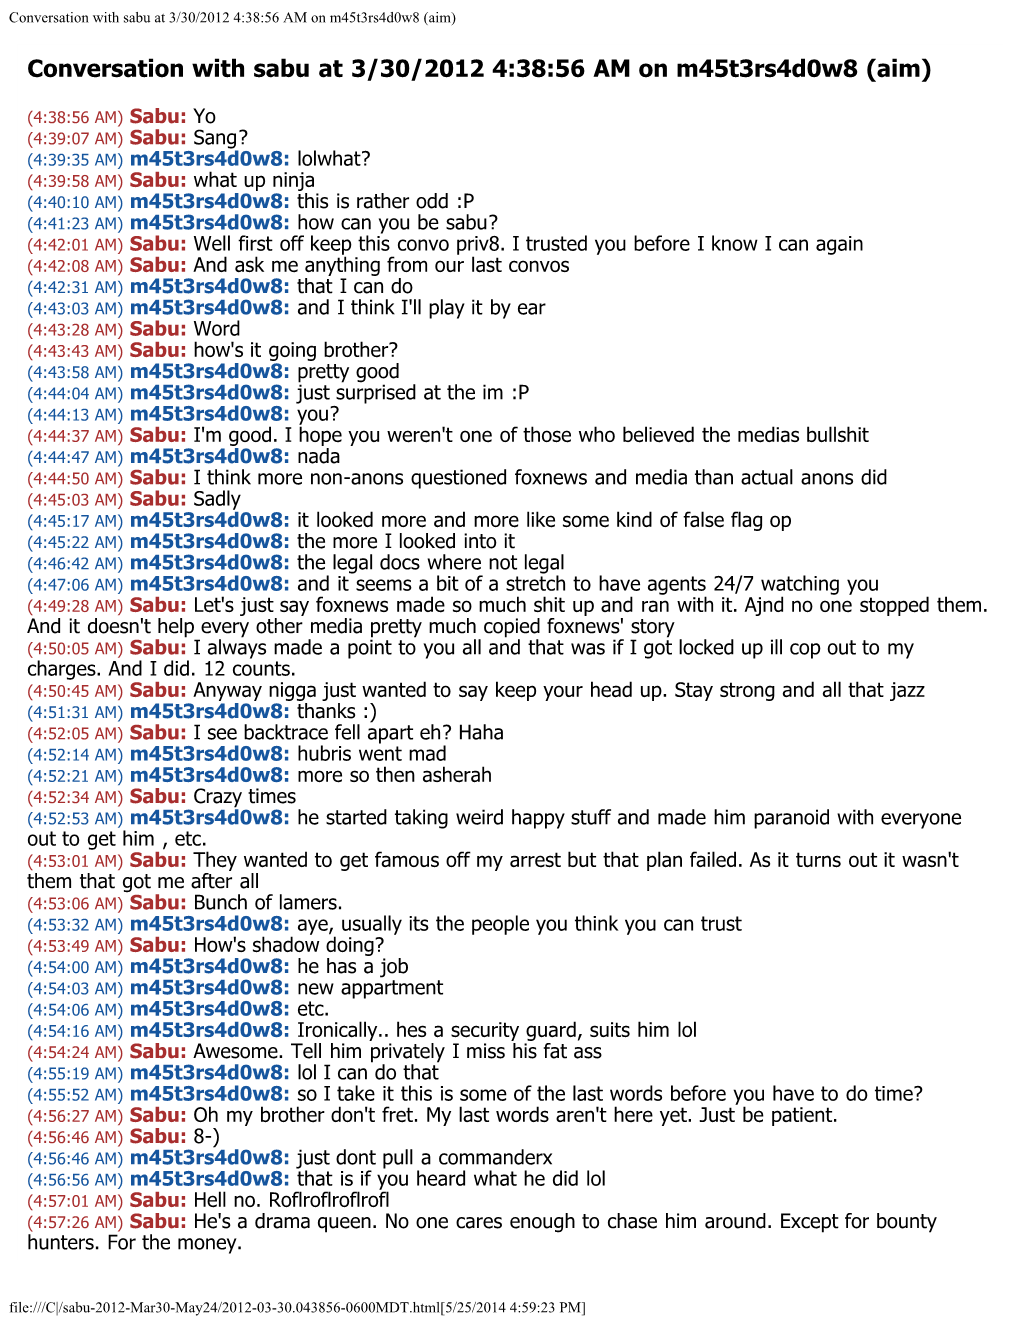 Conversation with Sabu at 3/30/2012 4:38:56 AM on M45t3rs4d0w8 (Aim)